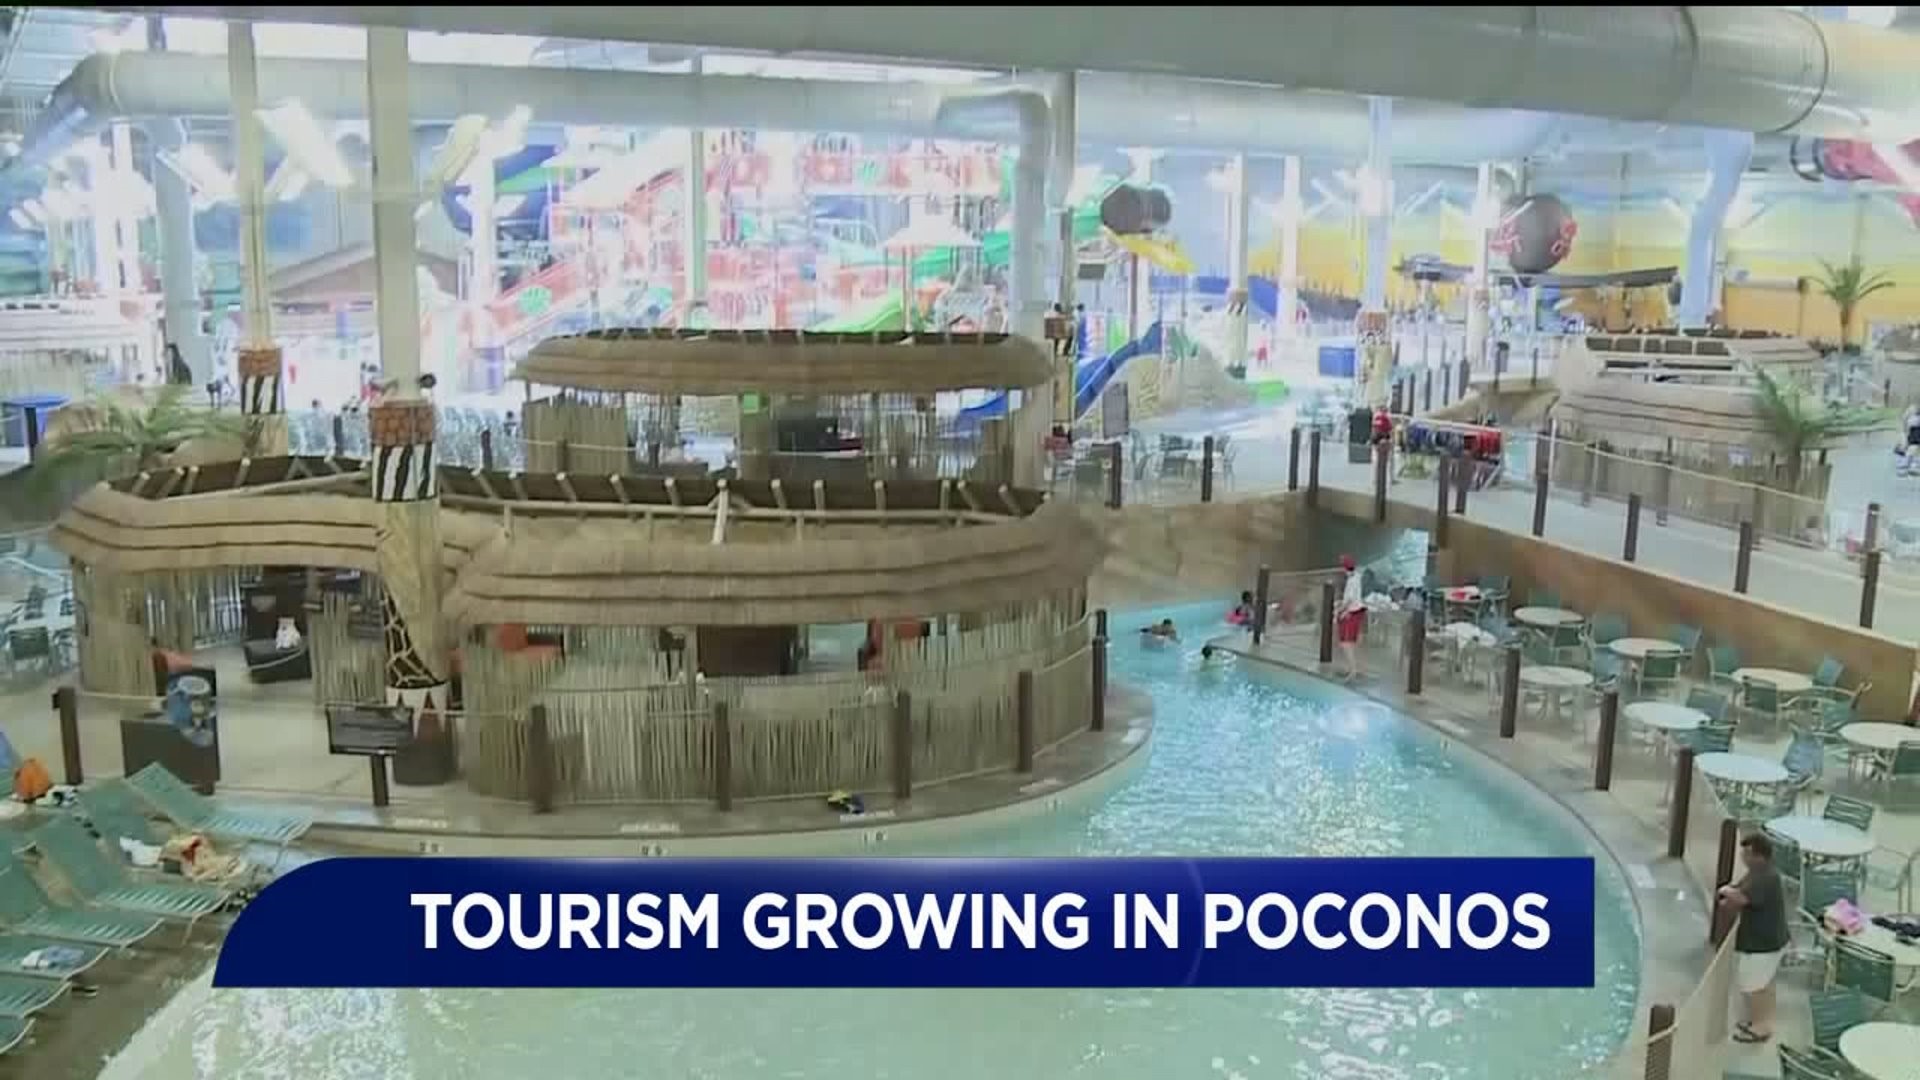 Pocono Tourism Officials Say Business is Booming